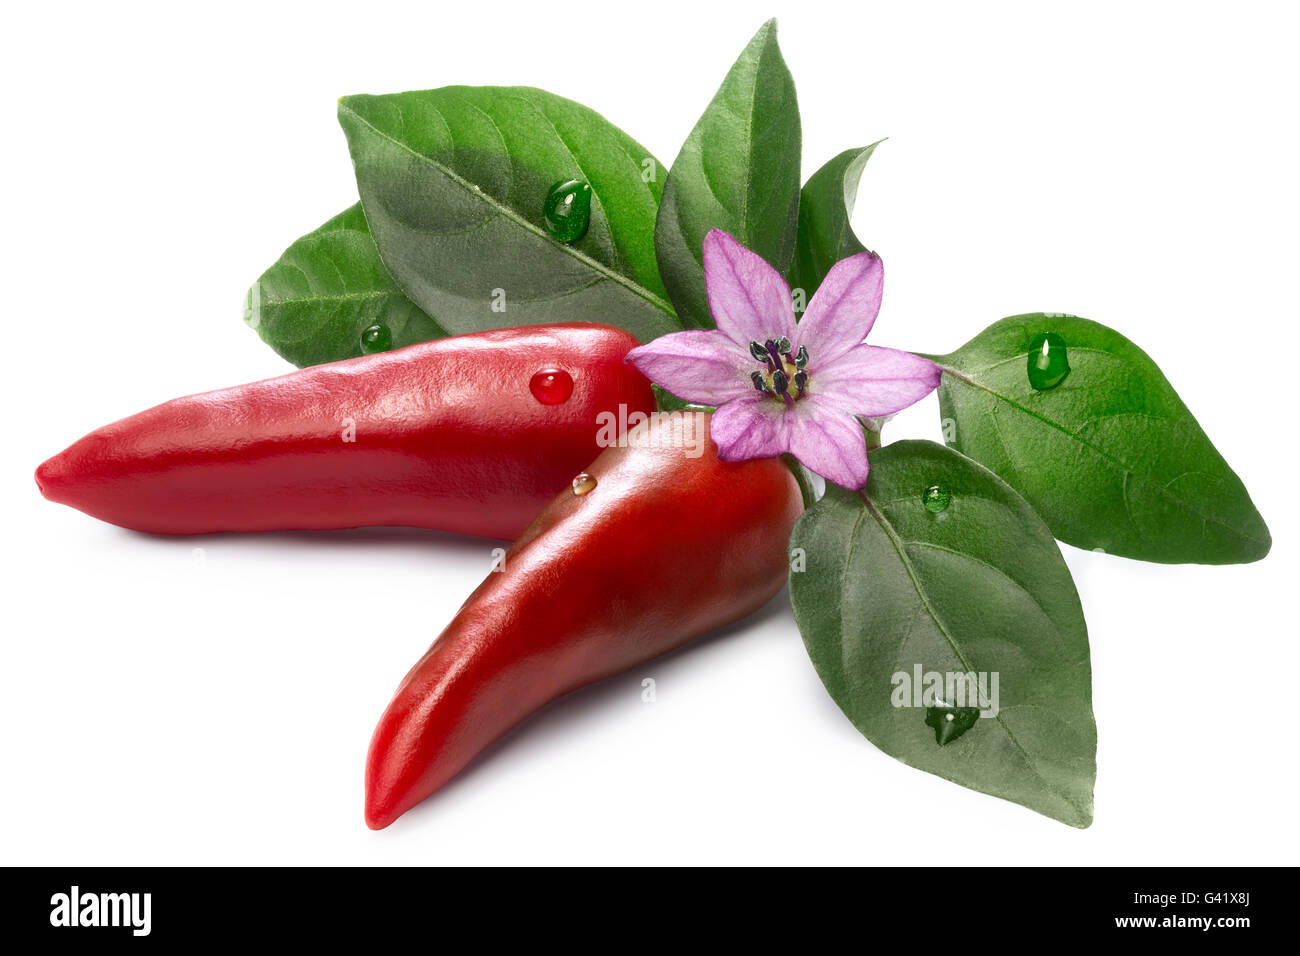 Hot Jalapeno Pepper (Capsicum Annuum) with leaves and flower. Clipping paths for both pepper and shadow, infinite depth of field Stock Photo